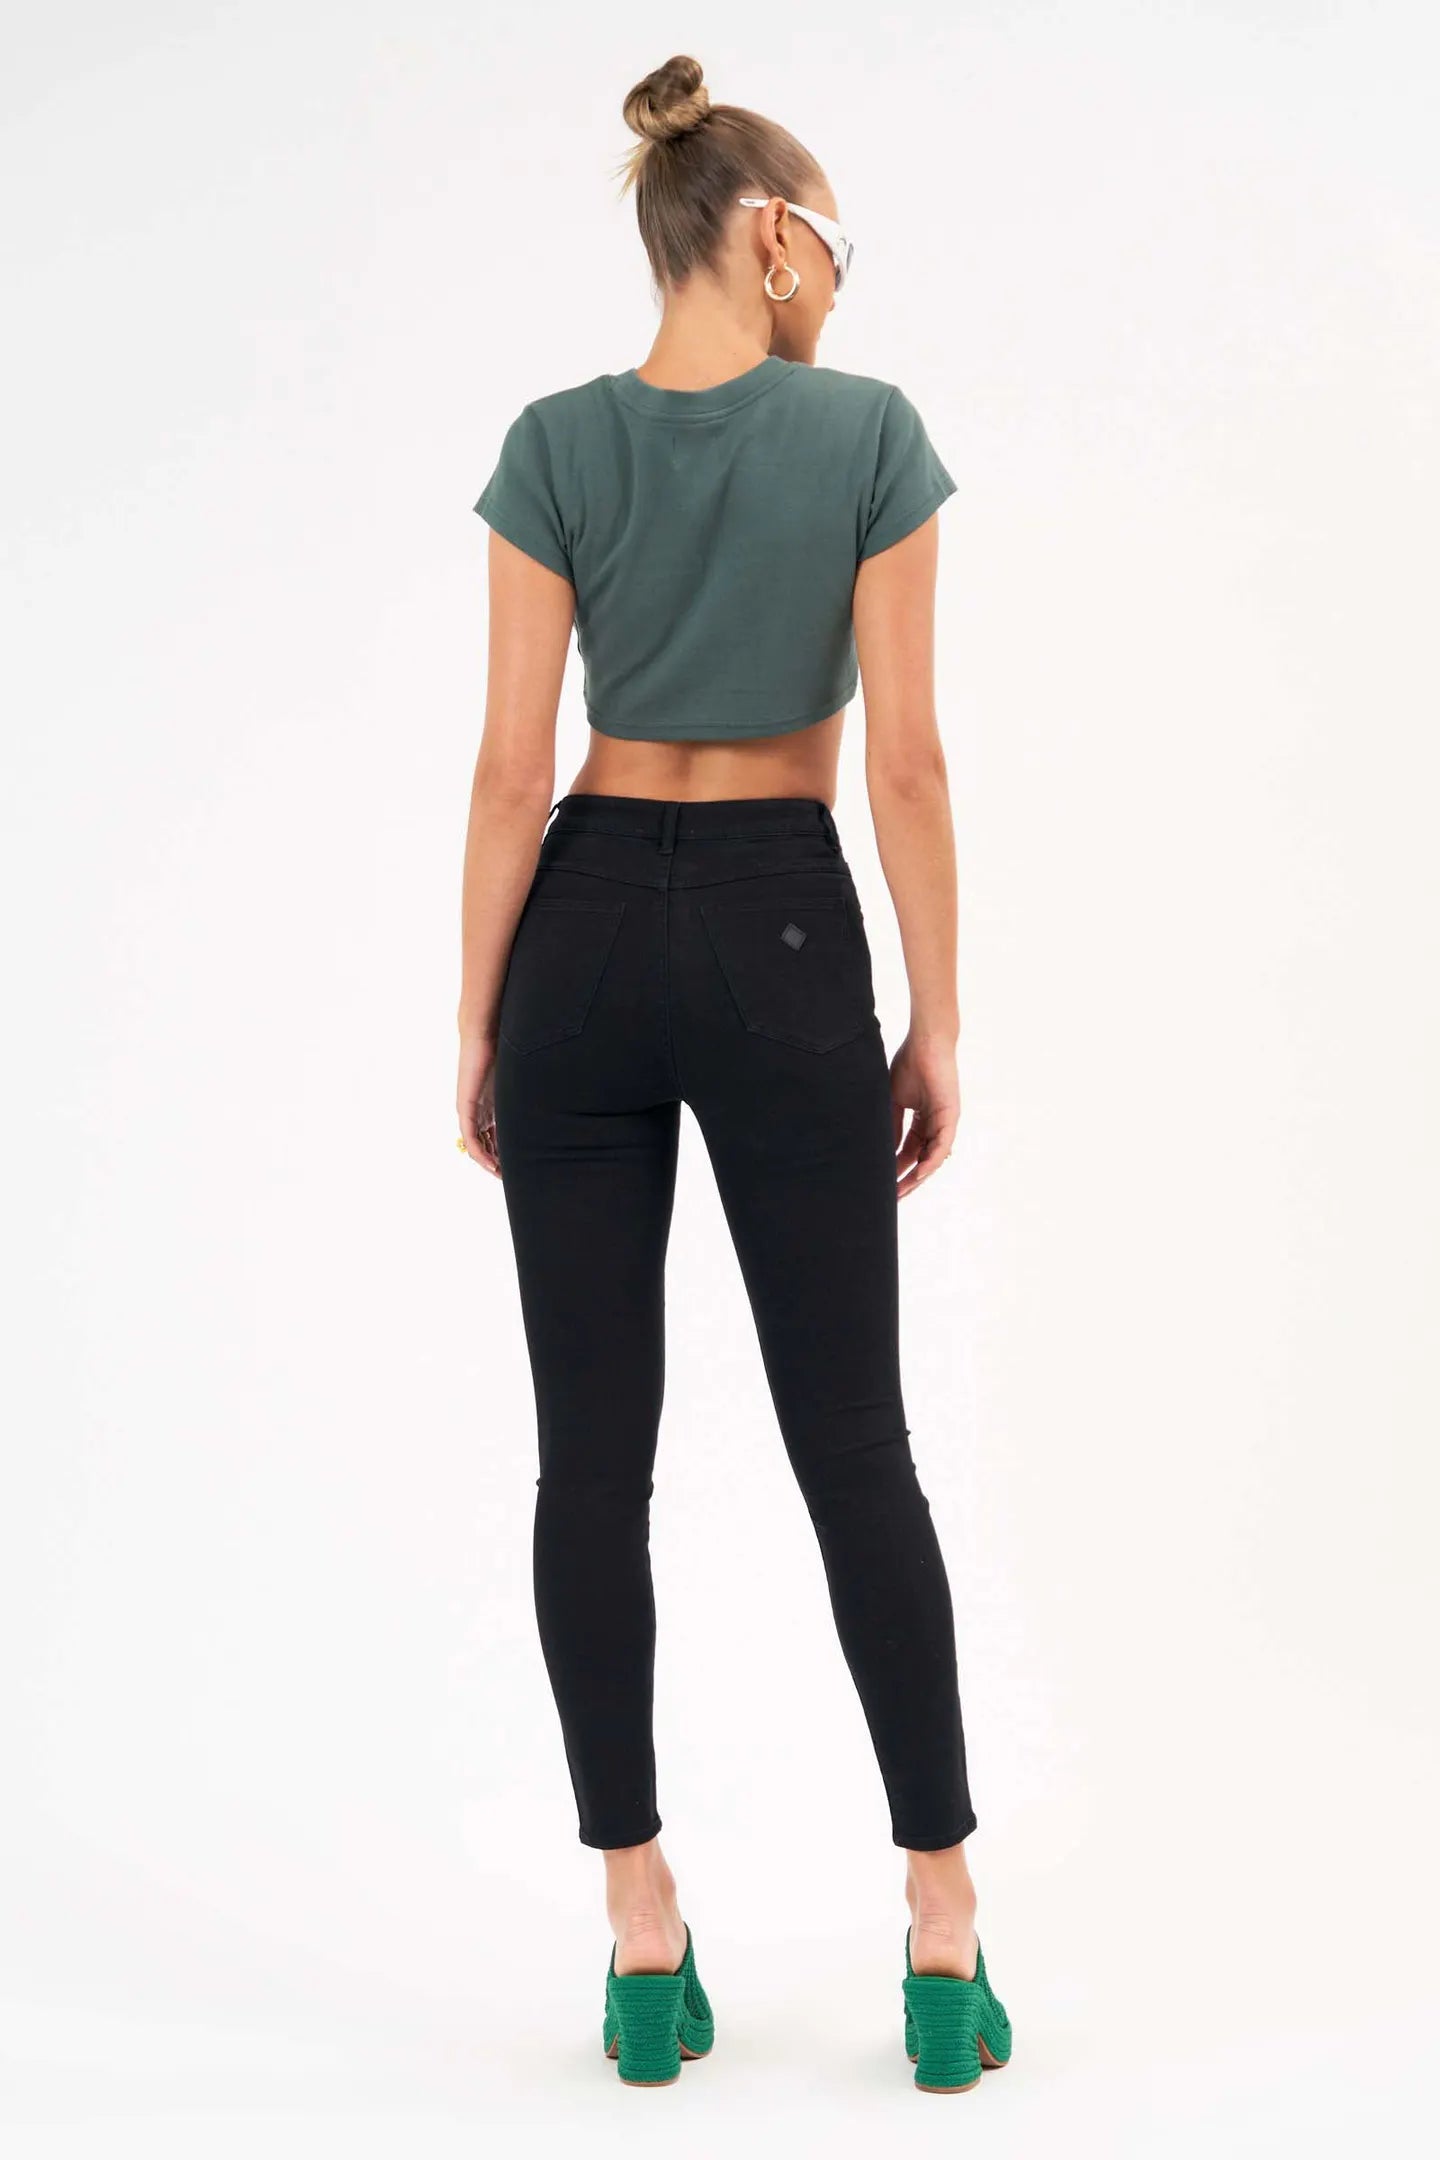 The A High Skinny Ankle Basher in Black Magic by ABRAND is a high rise, skinny leg jean, made with a super stretch denim, This fits true to size